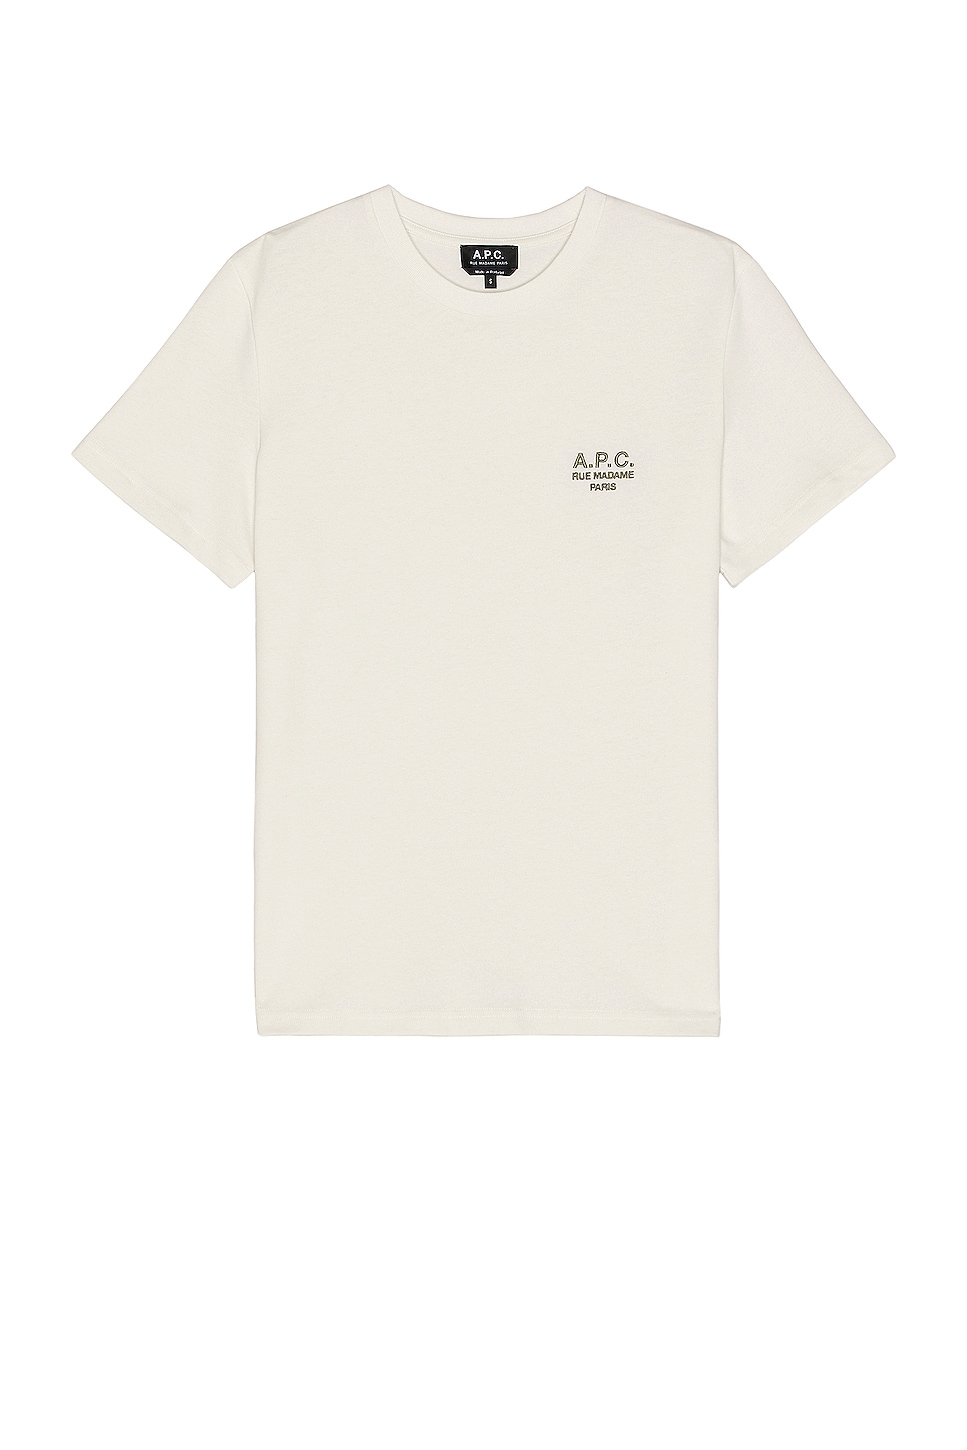 Image 1 of A.P.C. T-shirt New Raymond in Chalk